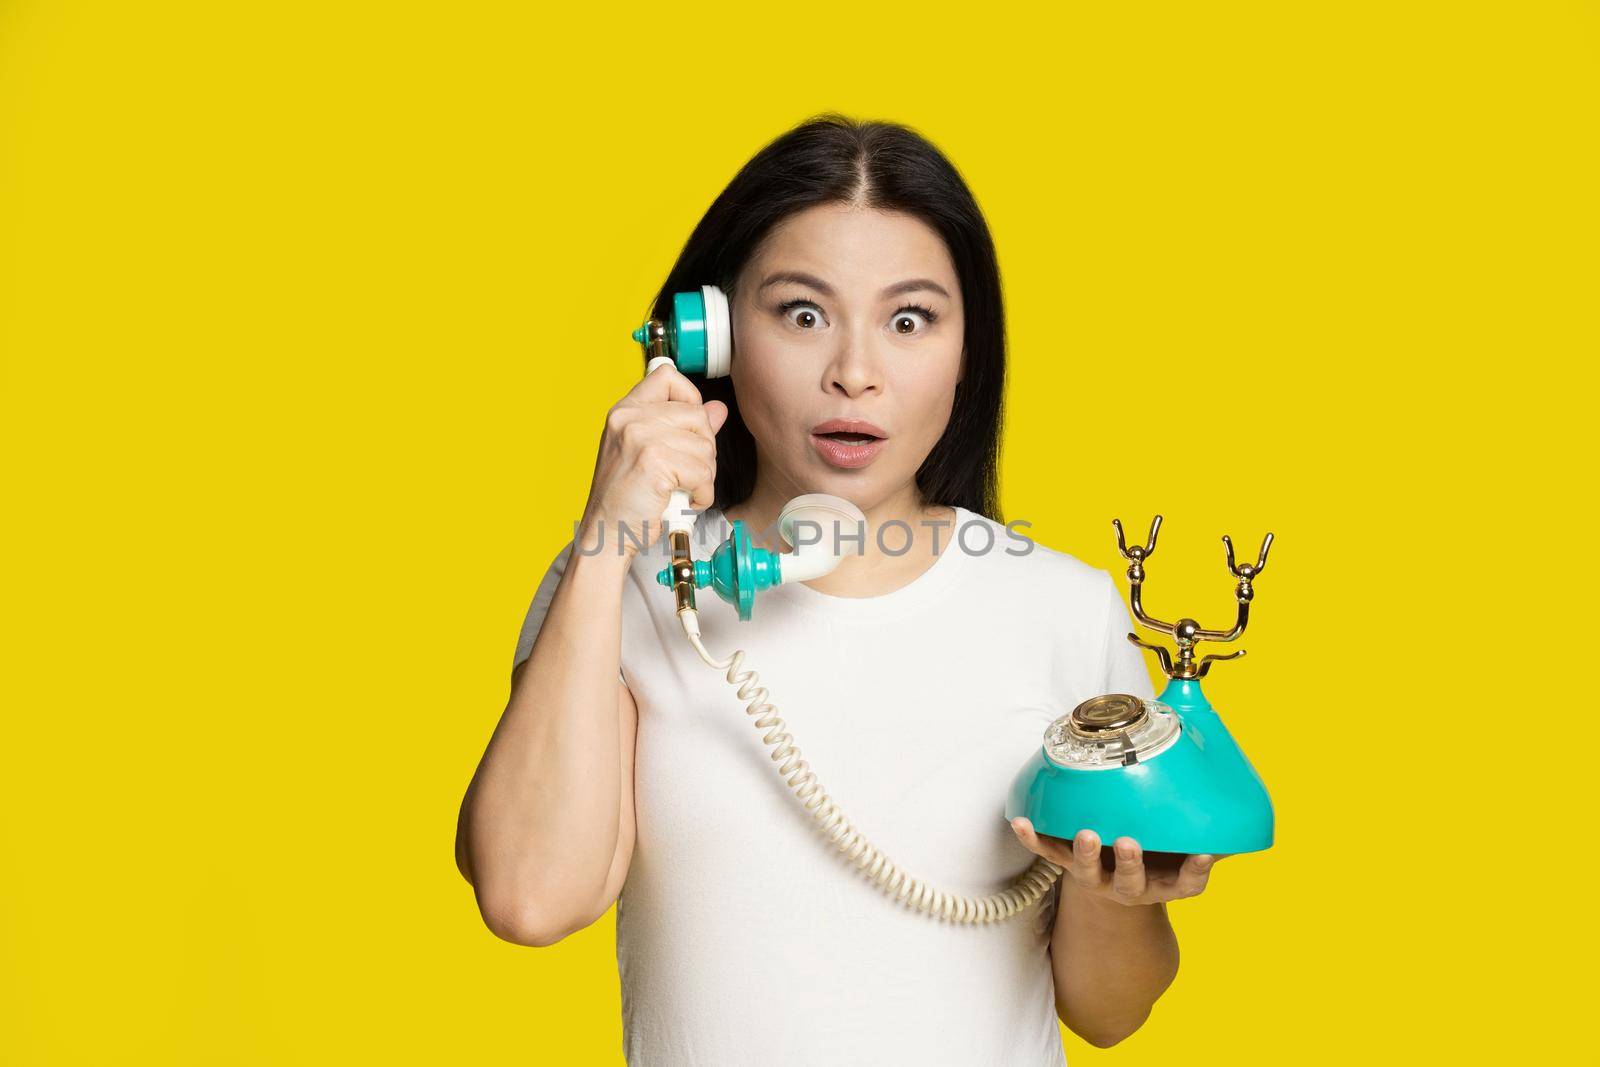 Shocked of winning lottery middle aged asian woman with vintage, retro telephone in hands excited, surprise face expression, isolated on yellow background. Communication concept.